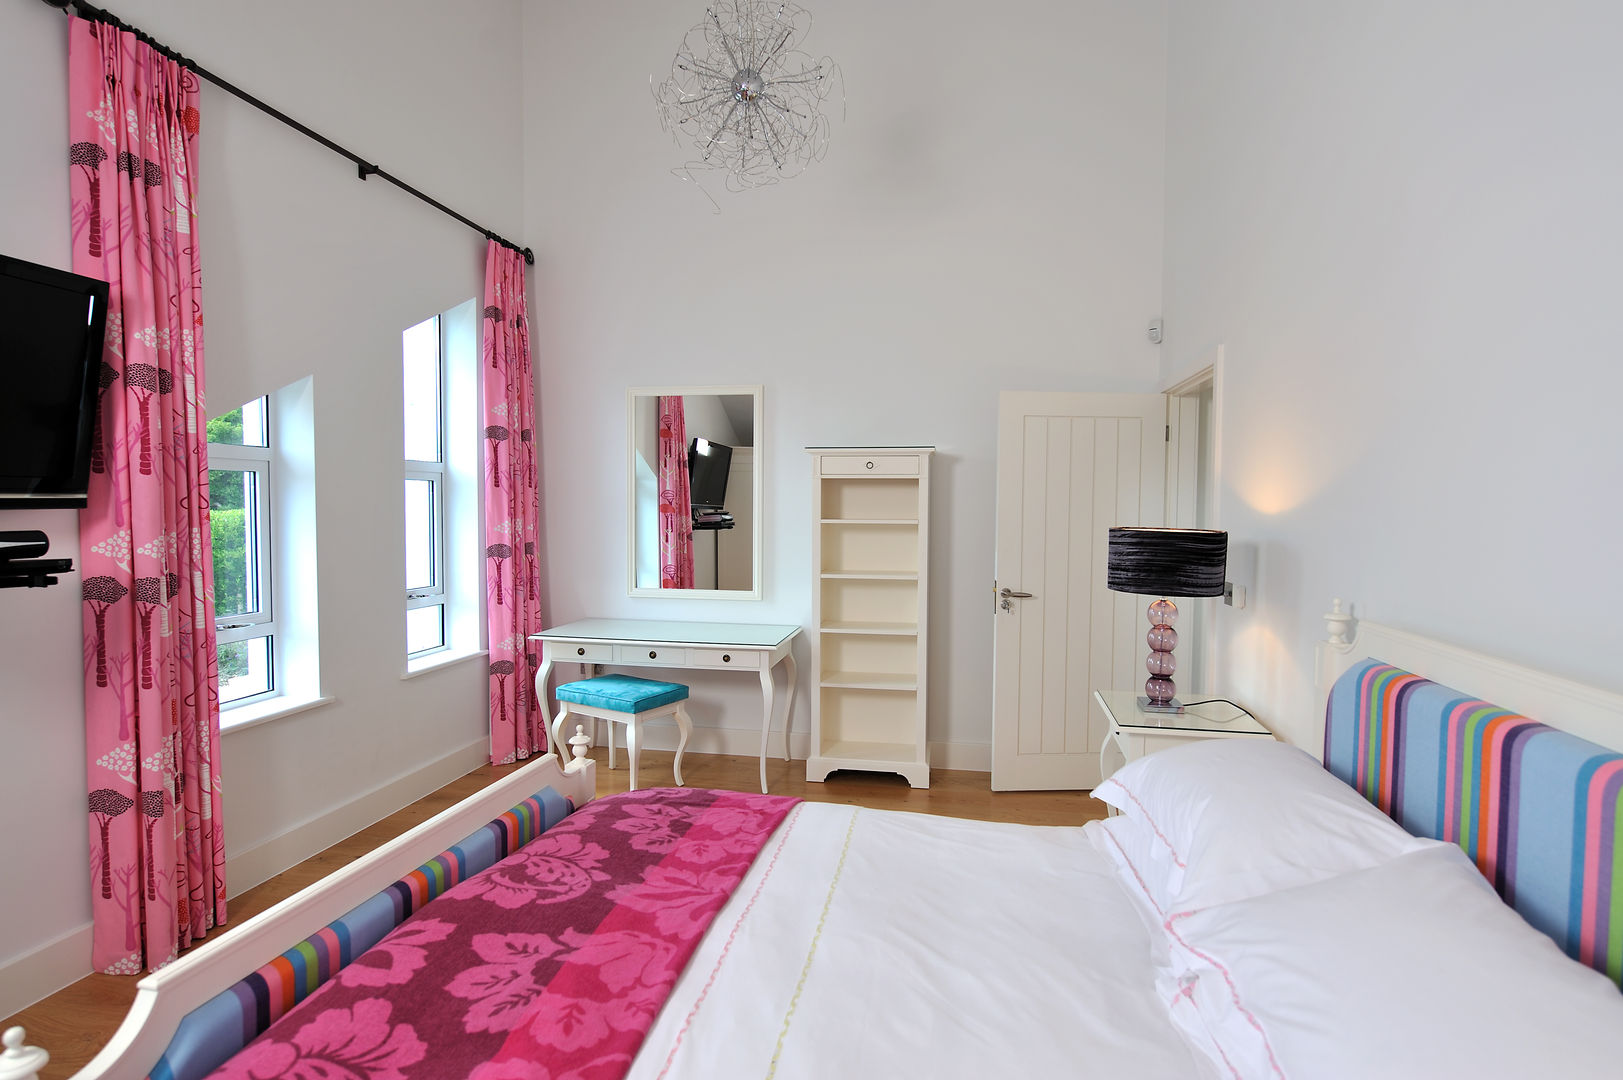 Sea House, Porth | Cornwall, Perfect Stays Perfect Stays Ausgefallene Schlafzimmer Bedroom,holiday home,pink,interior,holiday homes,beach house